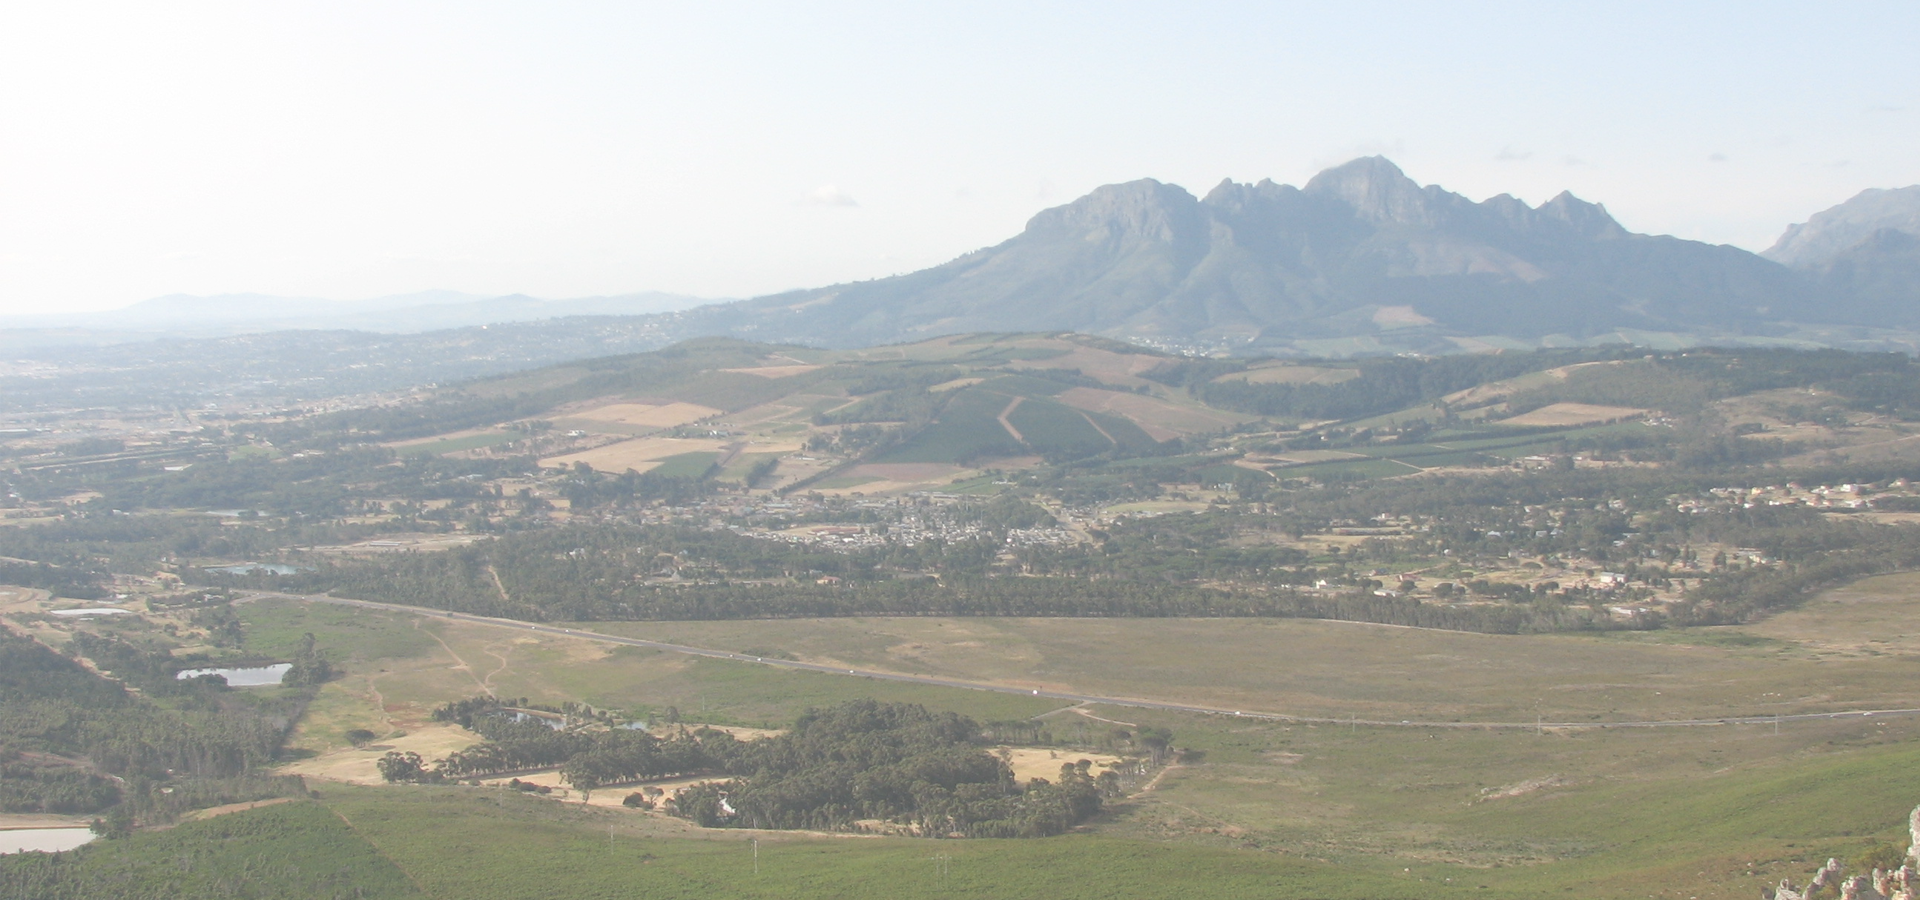 <b>Somerset West, Western Cape Province, South Africa</b>